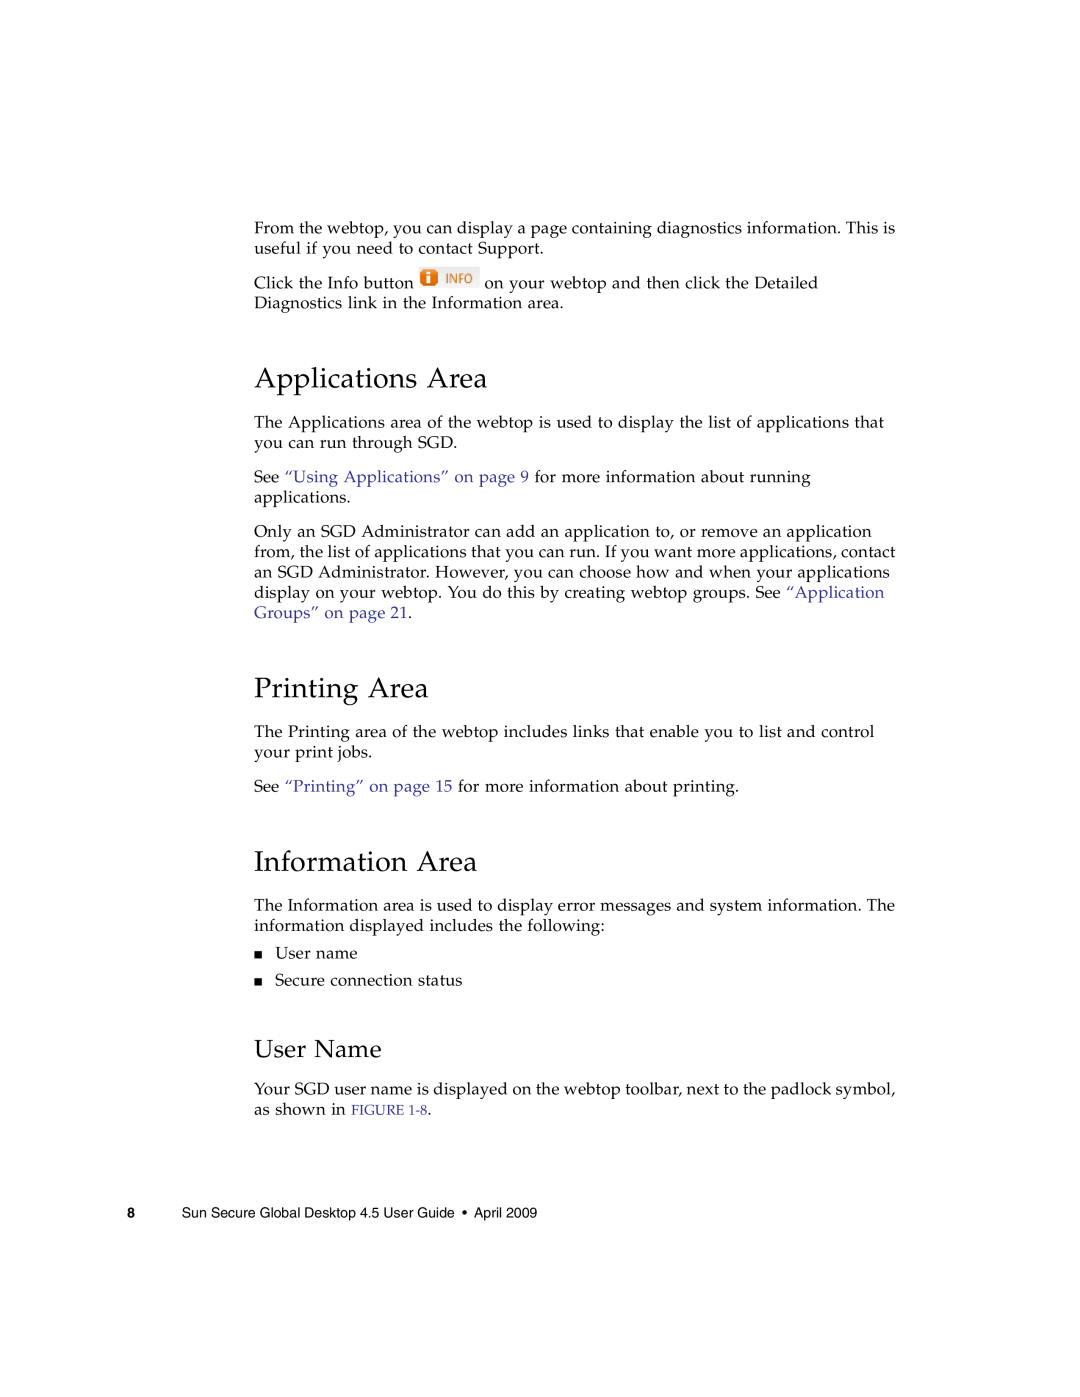 Sun Microsystems 4.5 manual Applications Area, Printing Area, Information Area, User Name 